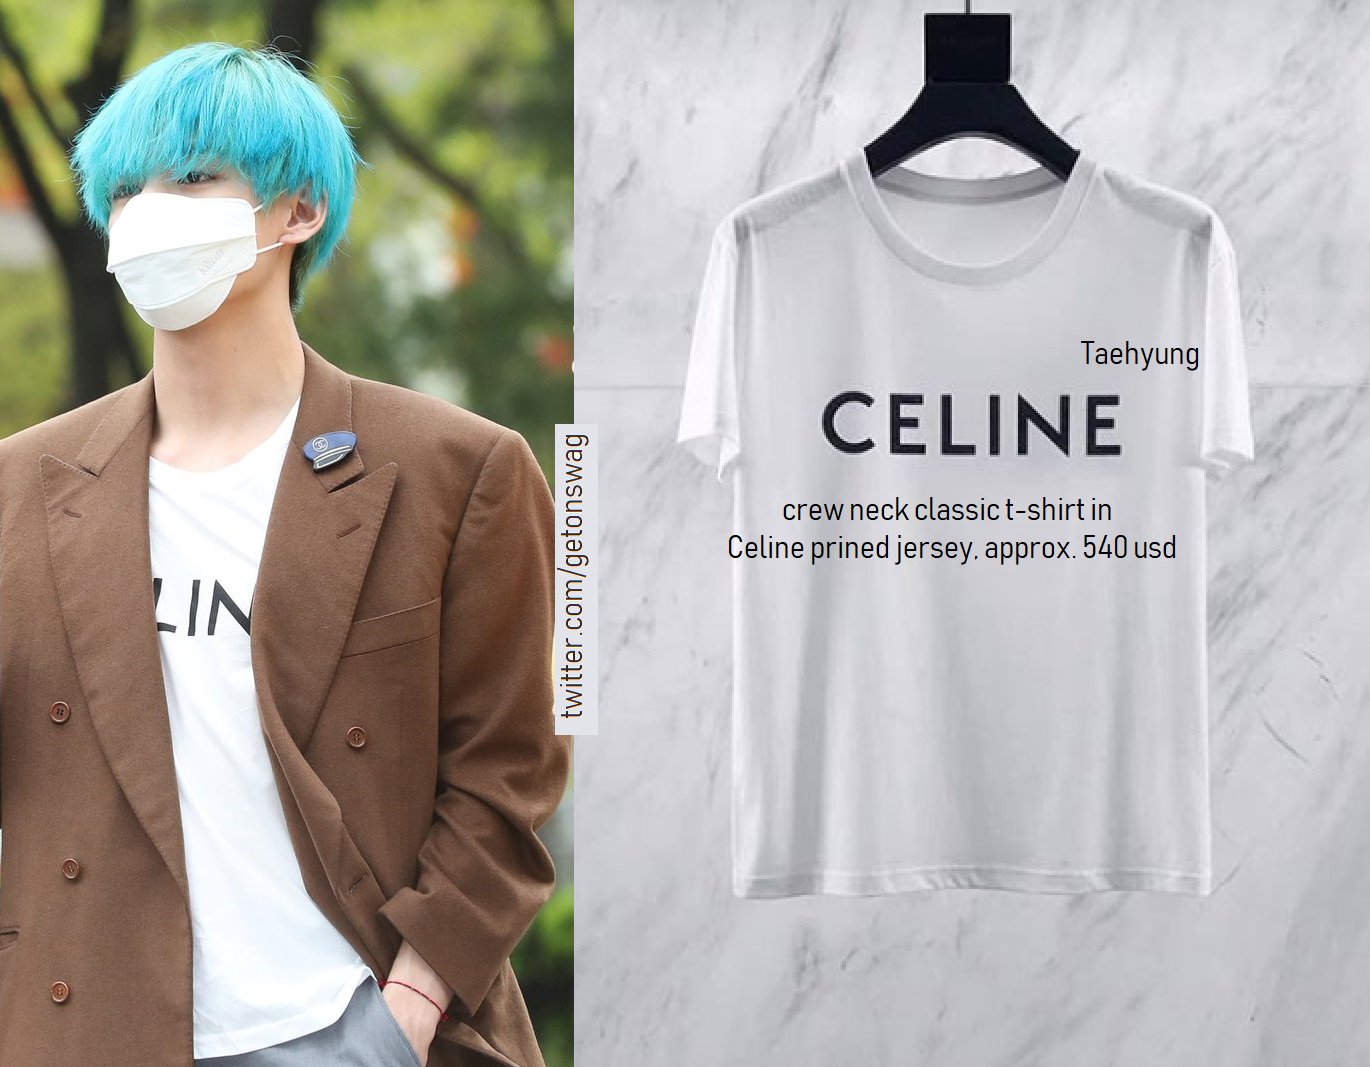 Beyond The Style ✼ Alex ✼ on X: requested 190419 #Taehyung #BTS Céline  crew neck classic t-shirt in Celine printed jersey, ss19    / X